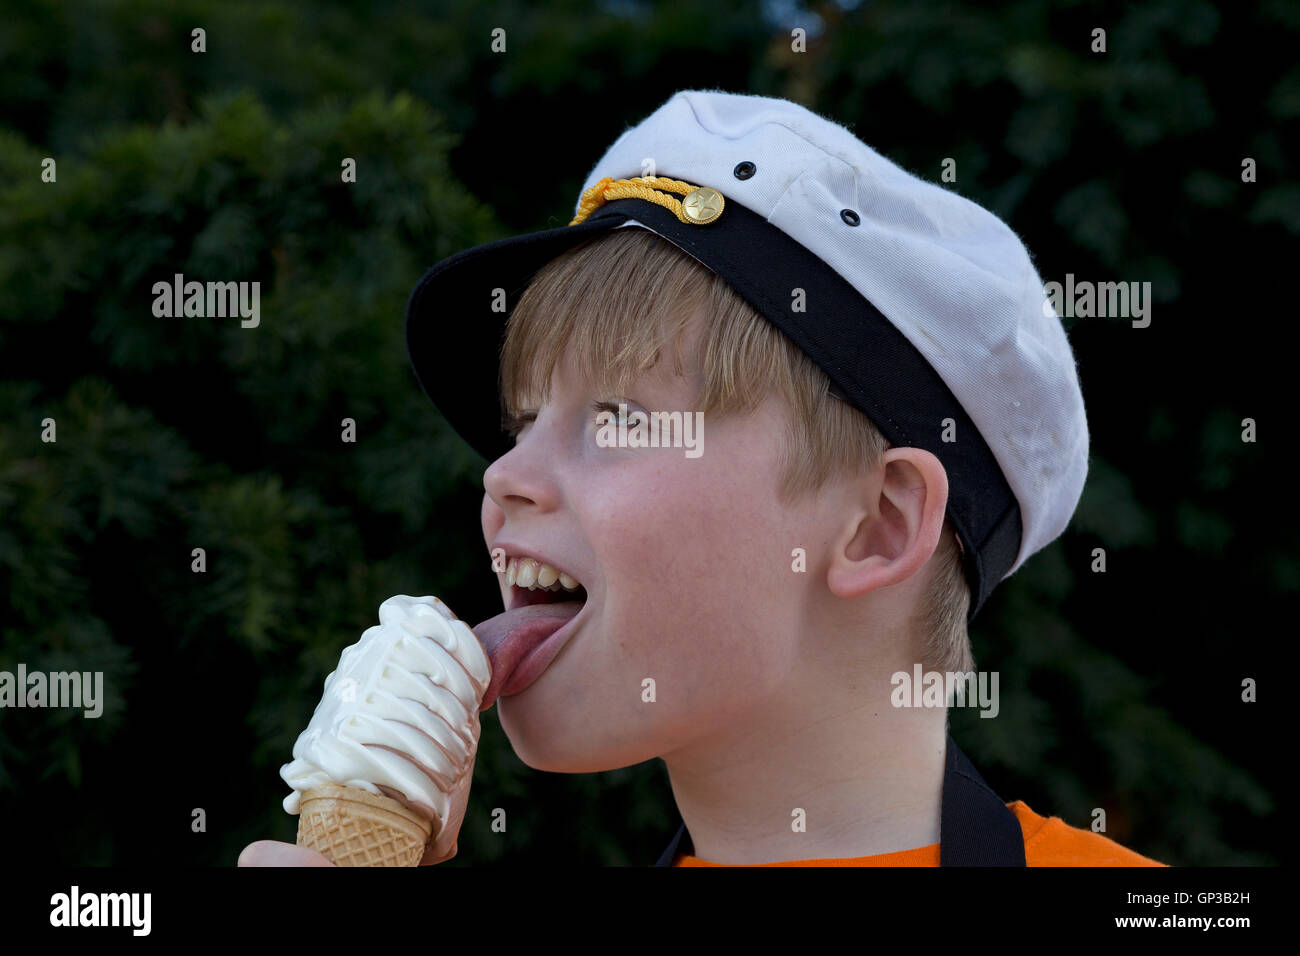 Portrait of a young boy eating ice cream Banque D'Images